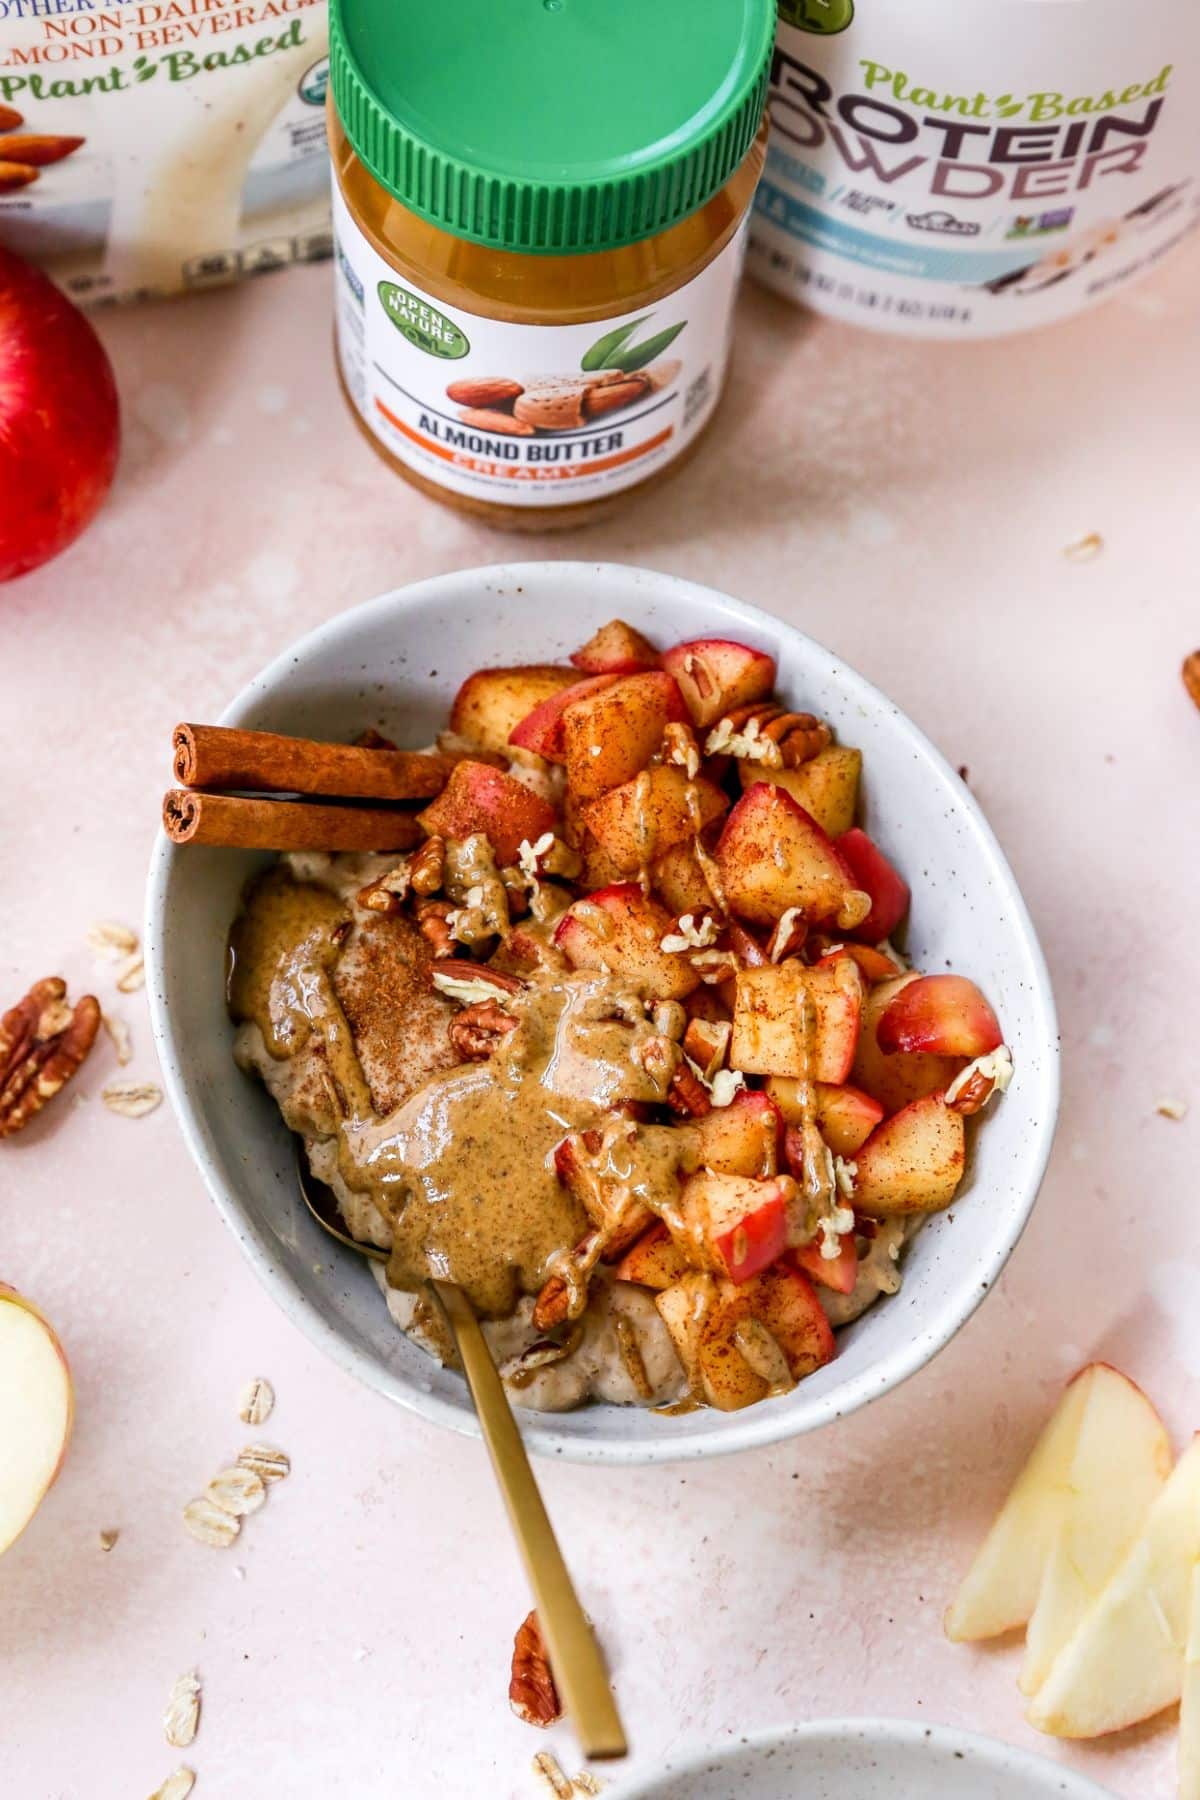 Bowl filled with oatmeal, diced apples and almond butter.